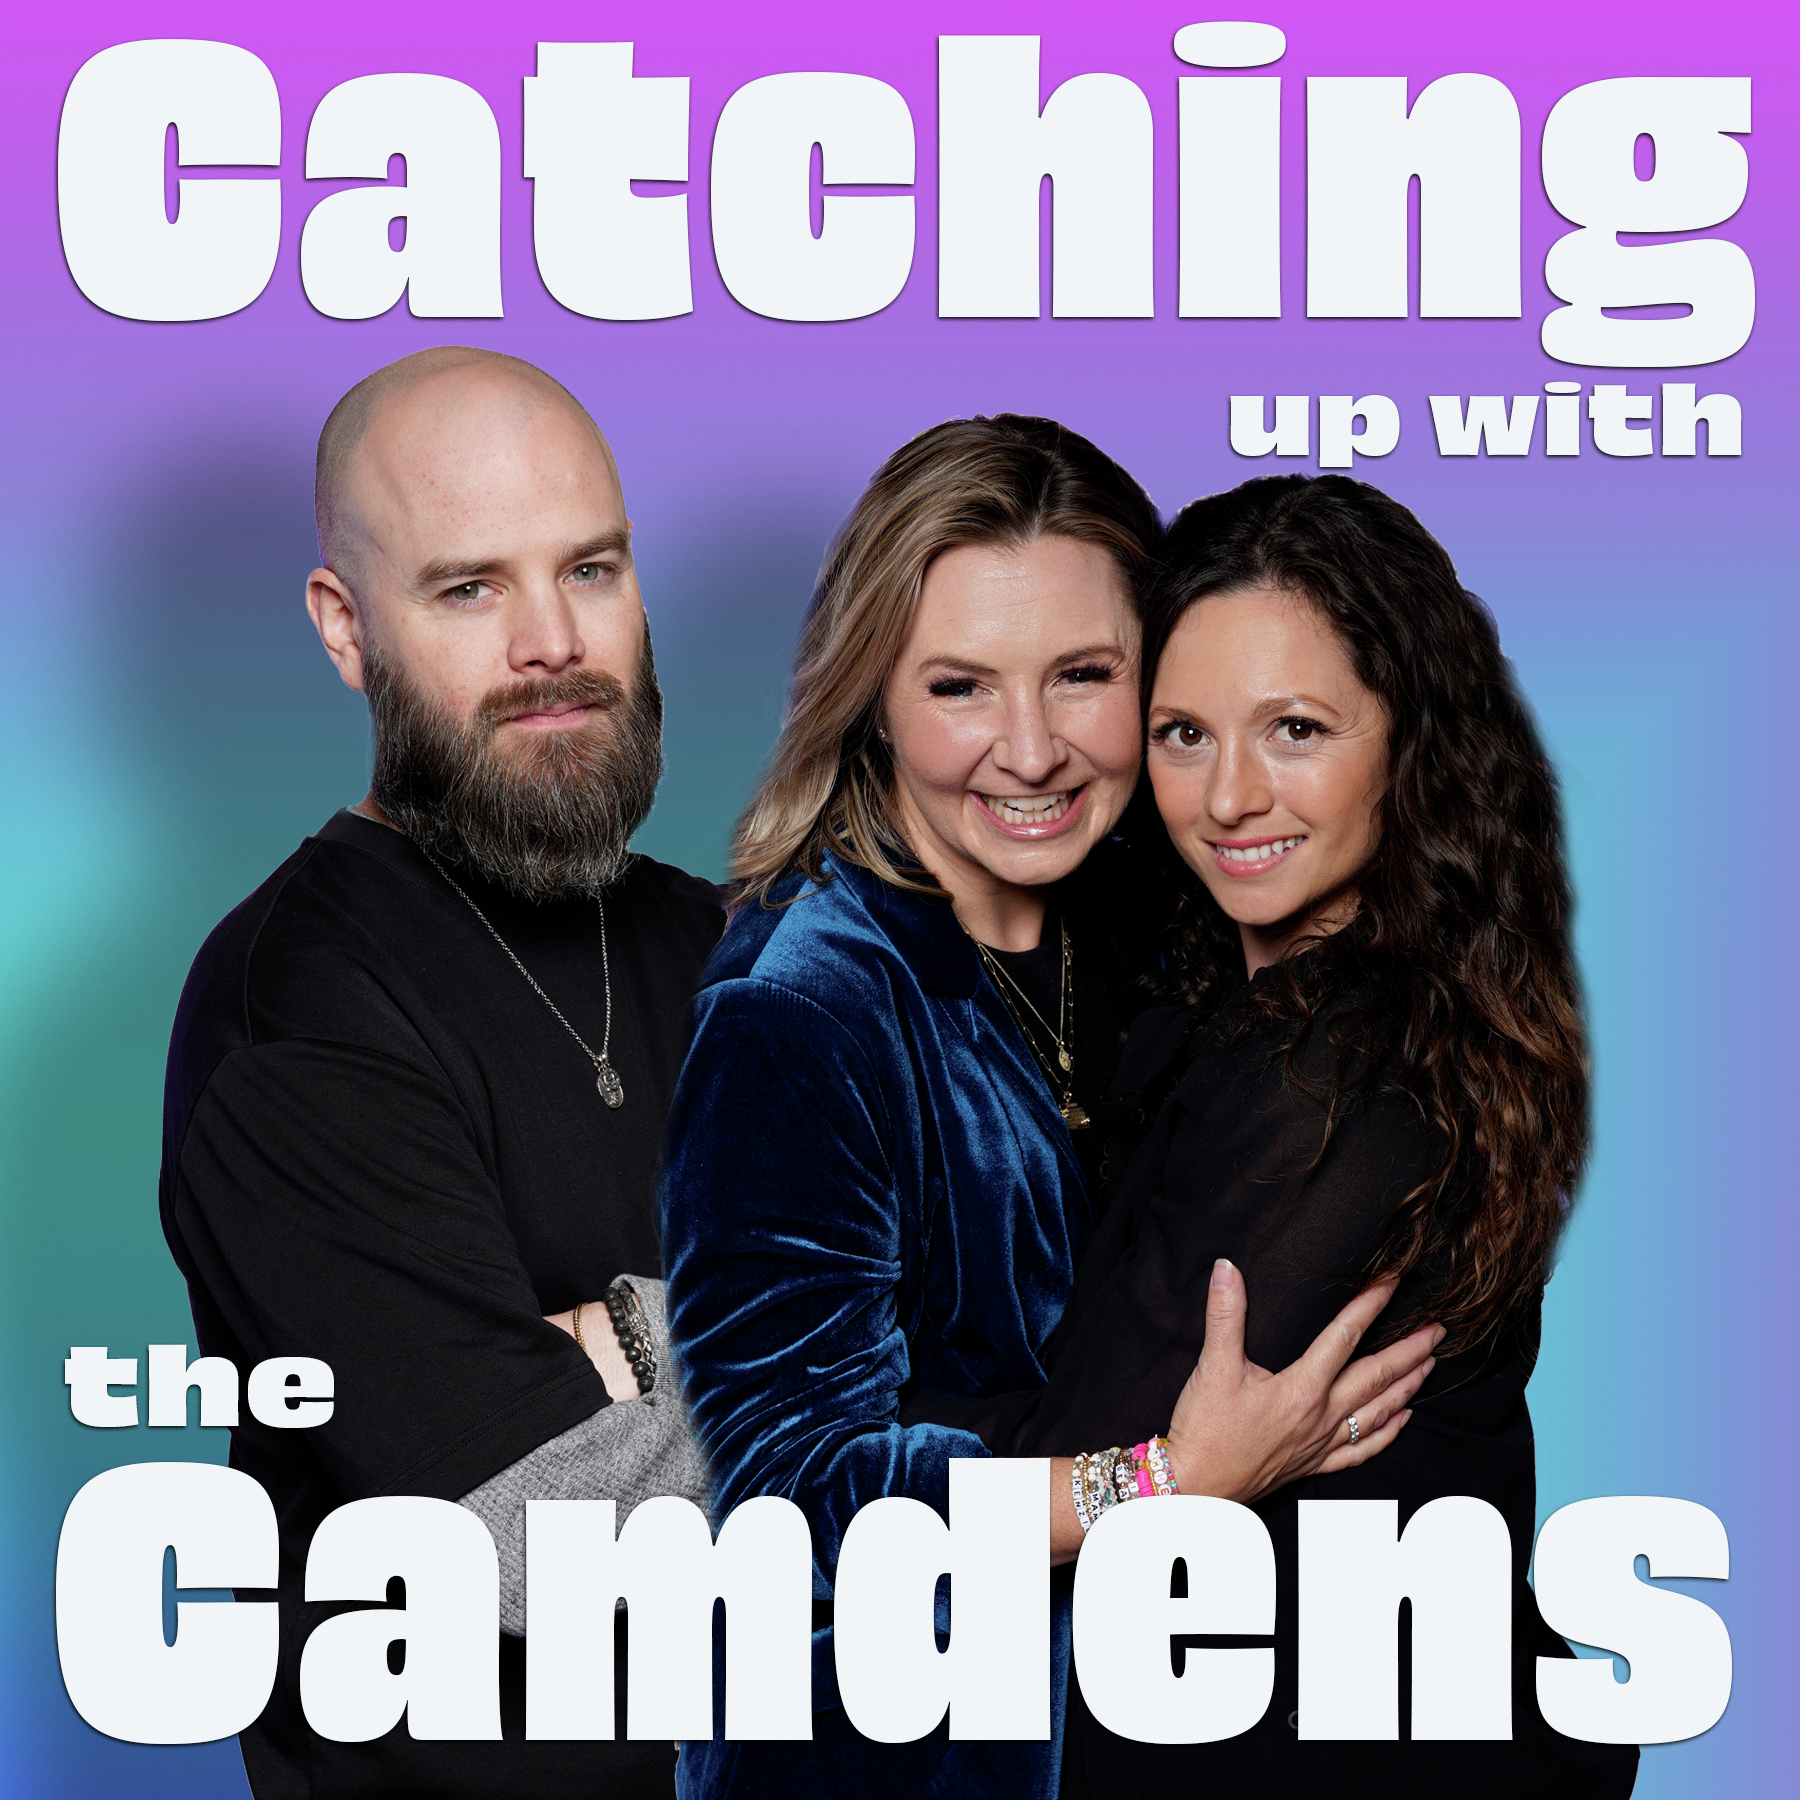 Introducing: Catching up with the Camdens